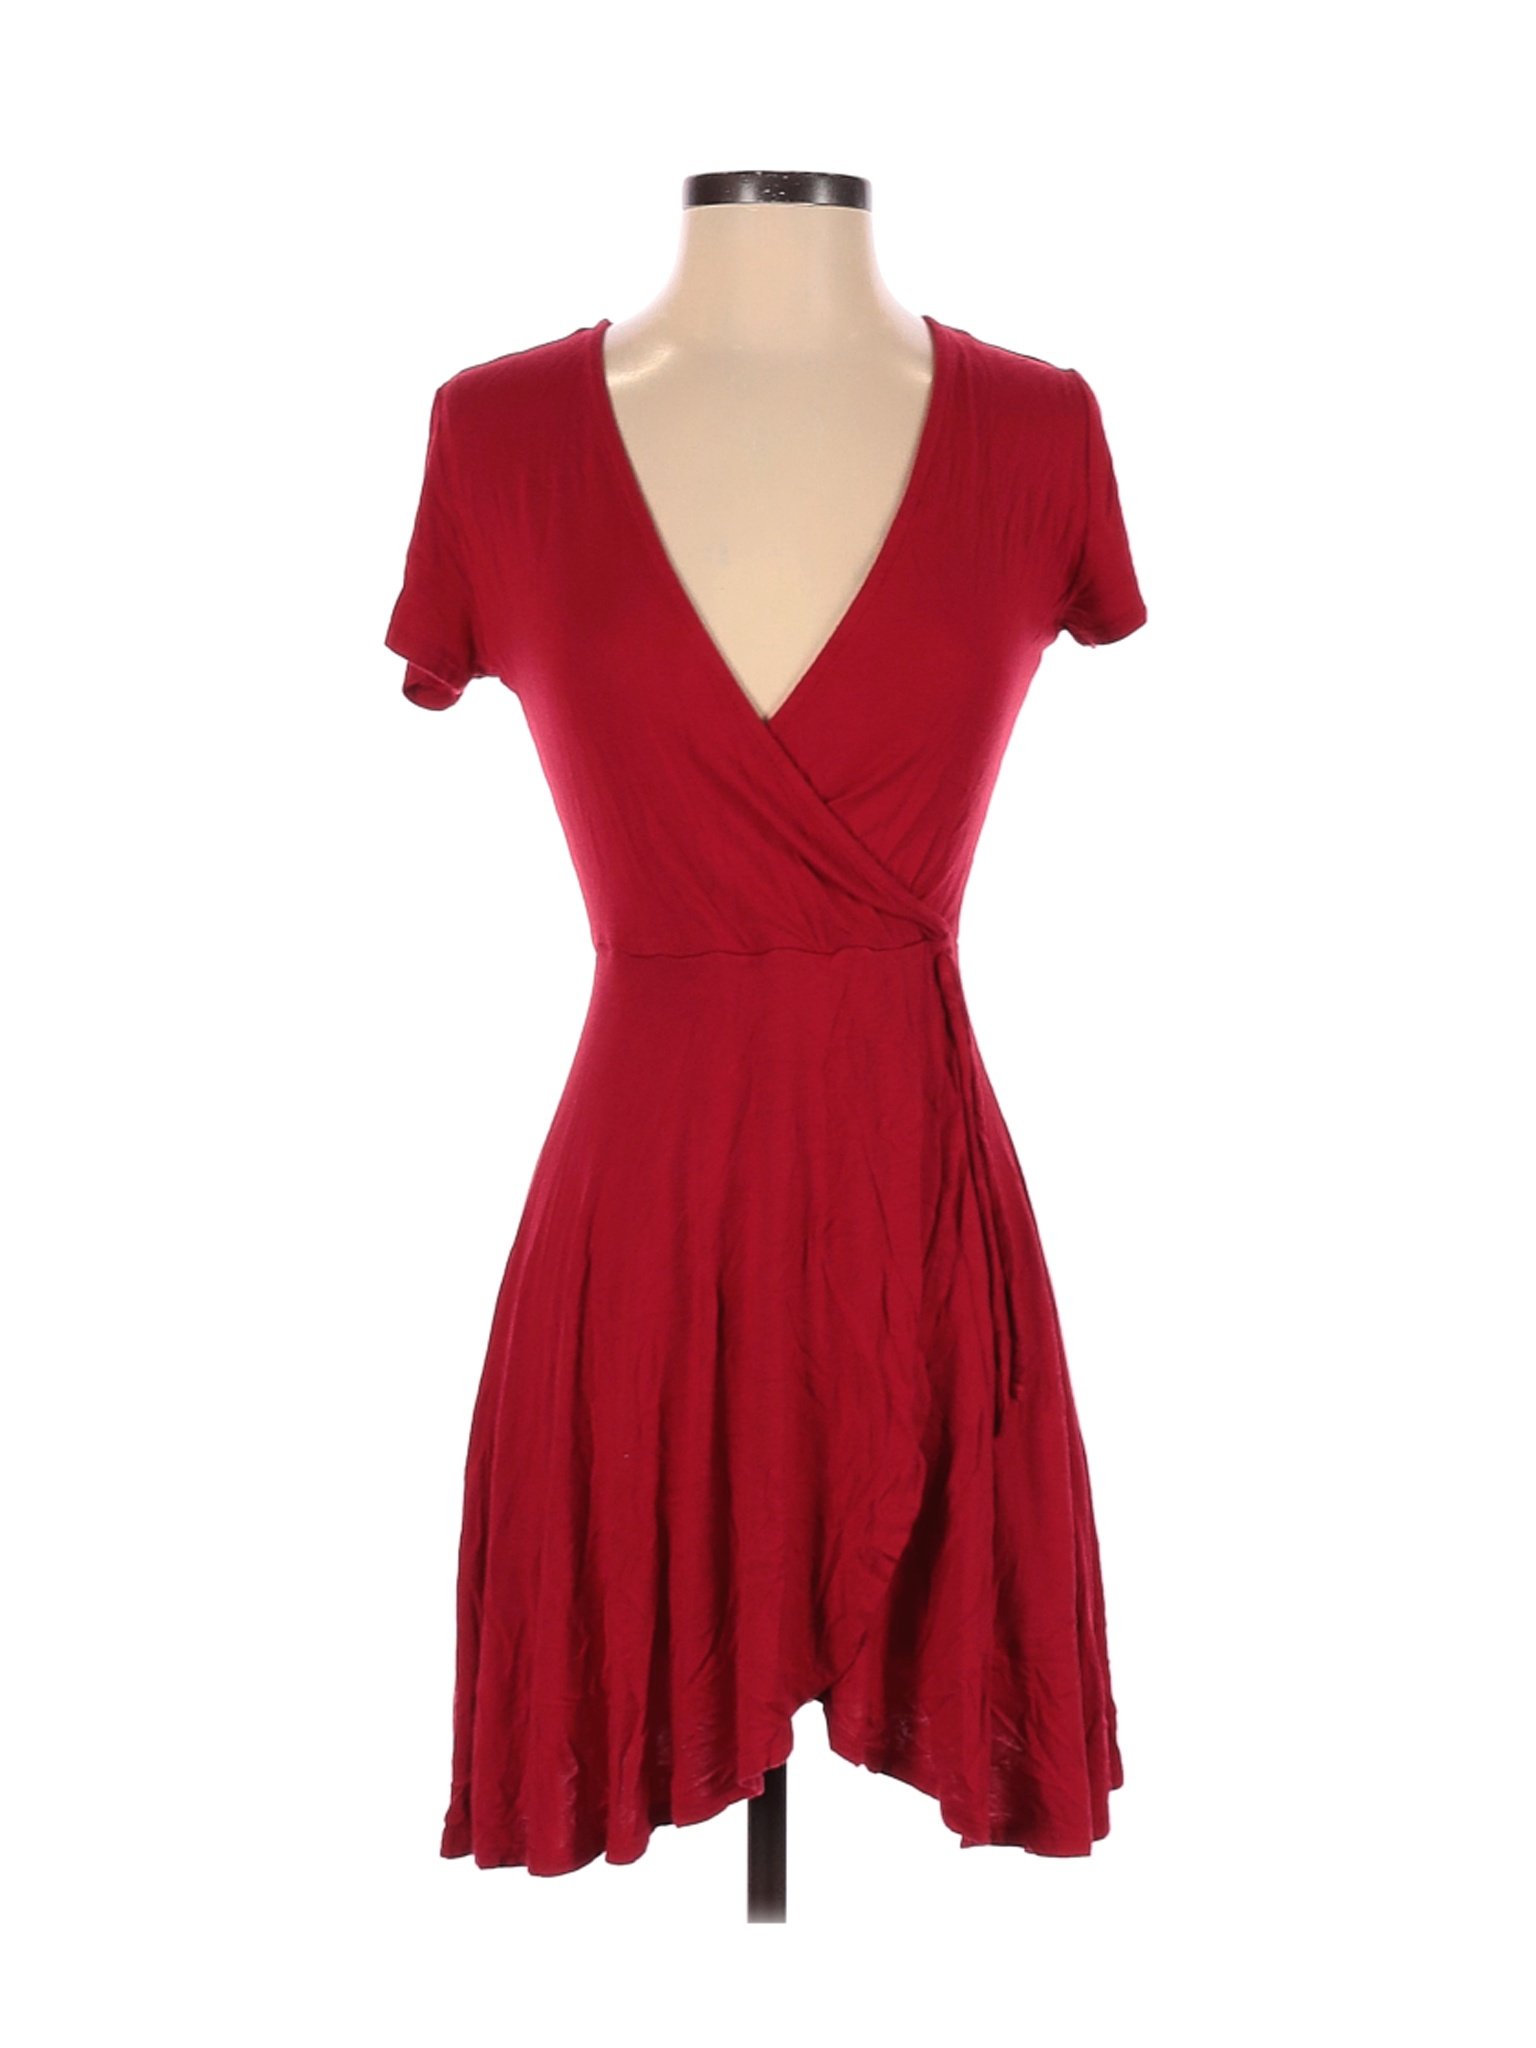 Rolla Coster Women Red Casual Dress S | eBay